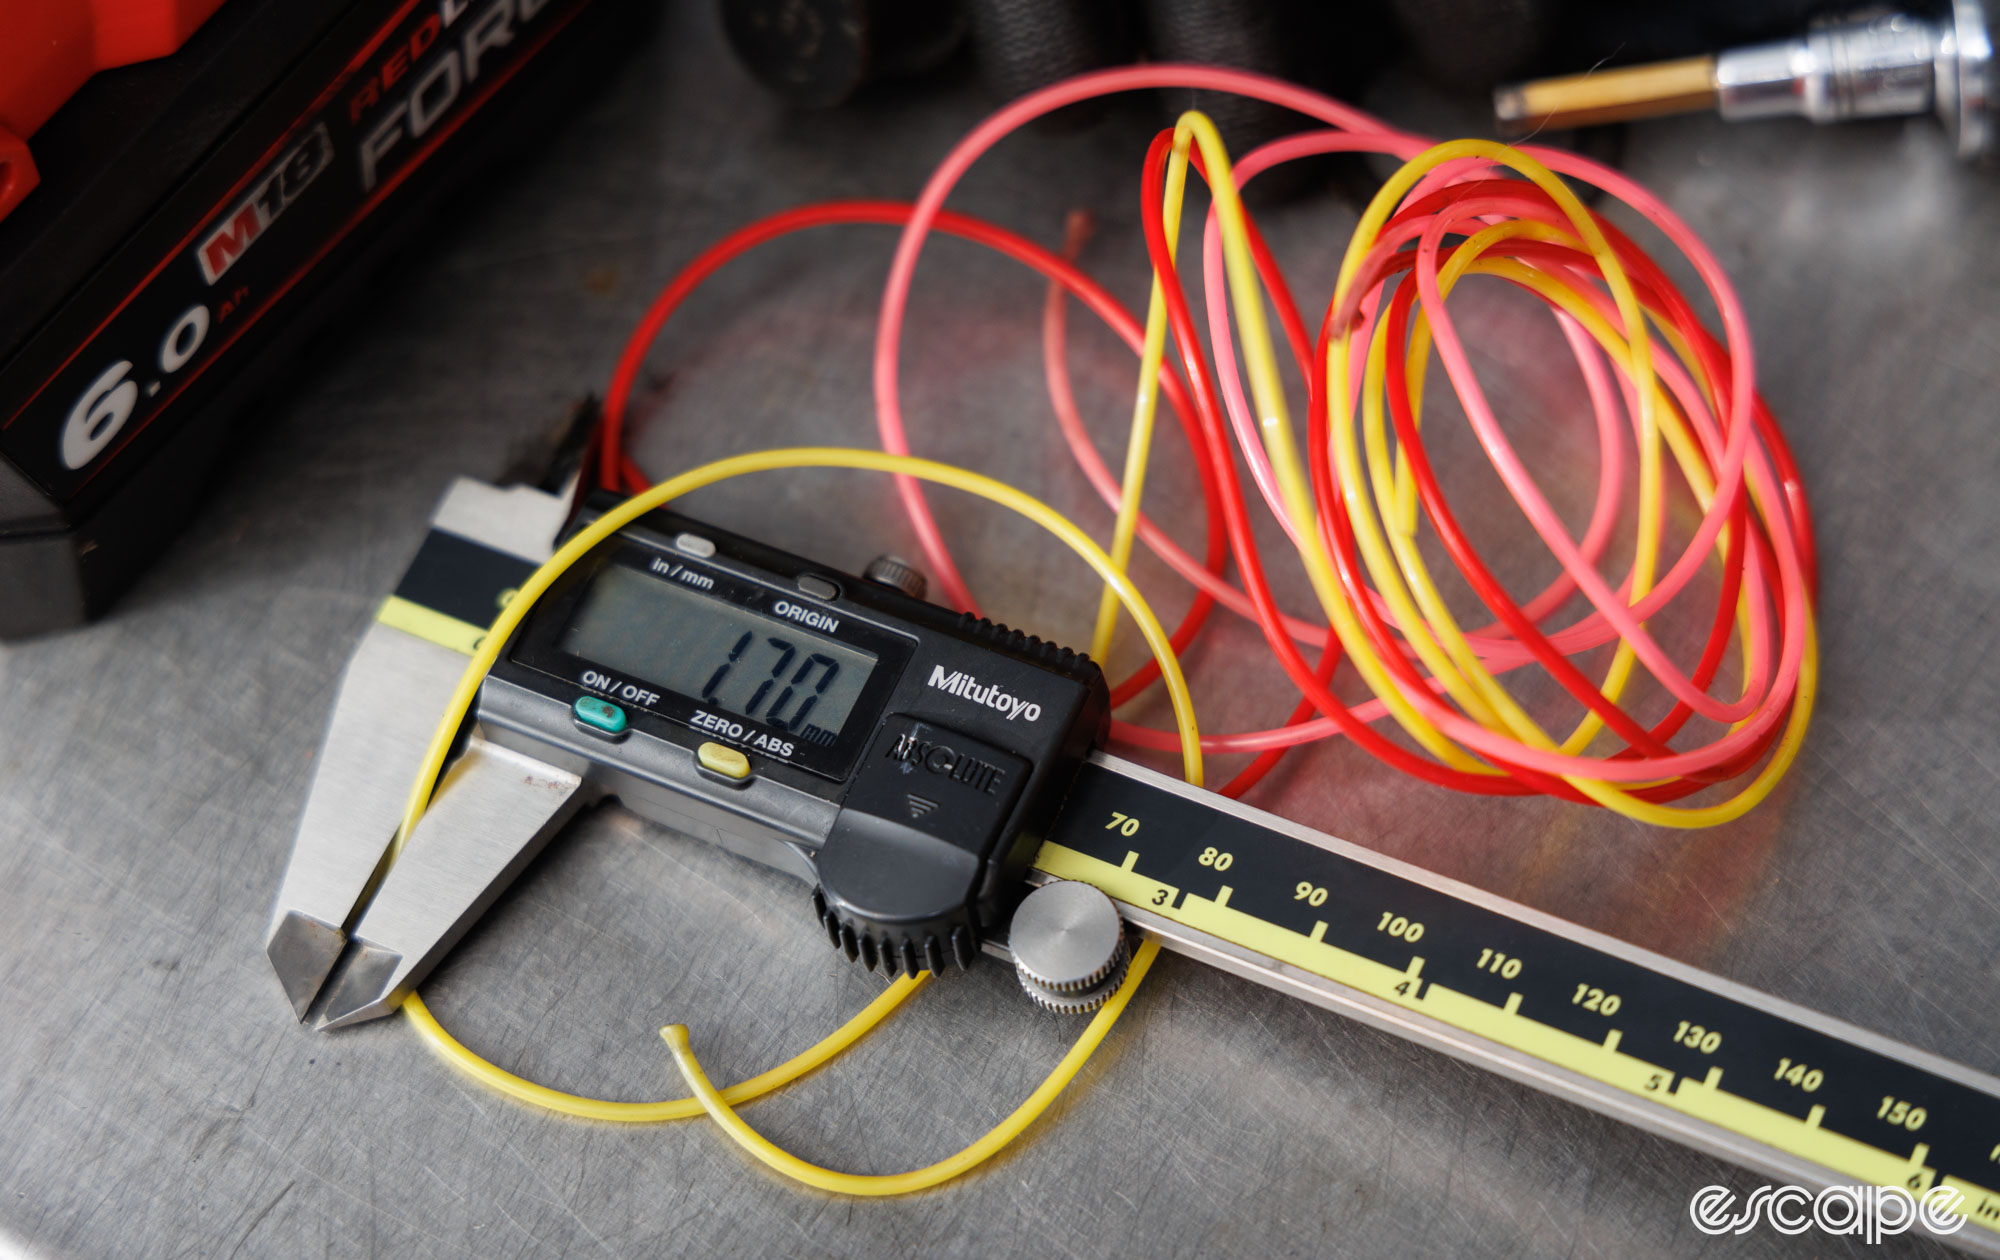 A collection of colourful plastic braiding cords being measured. The calipers show an external diameter of 1.7 mm. 